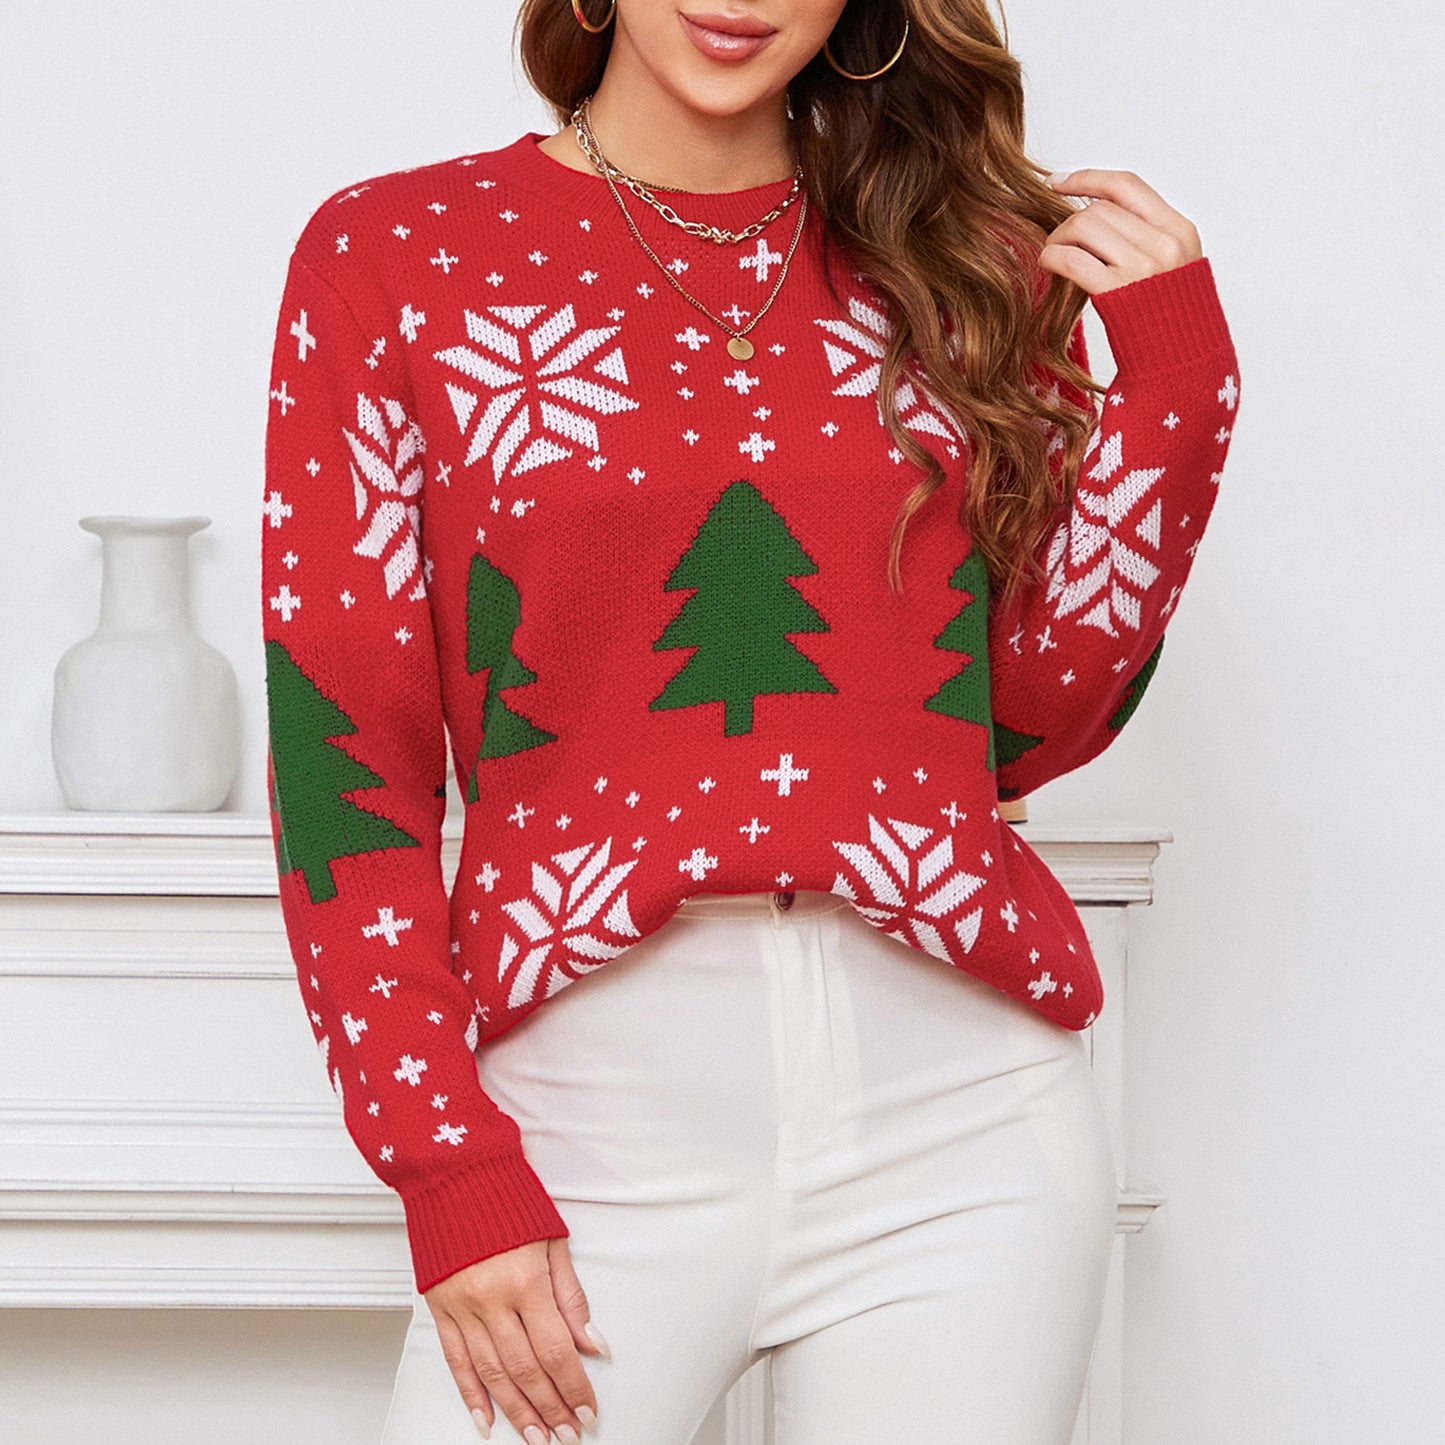 EXLURA Women’s Ugly Christmas Sweater Crew Neck Long Sleeve Chunky Pullover Sweater Casual Trendy Jumper Tops